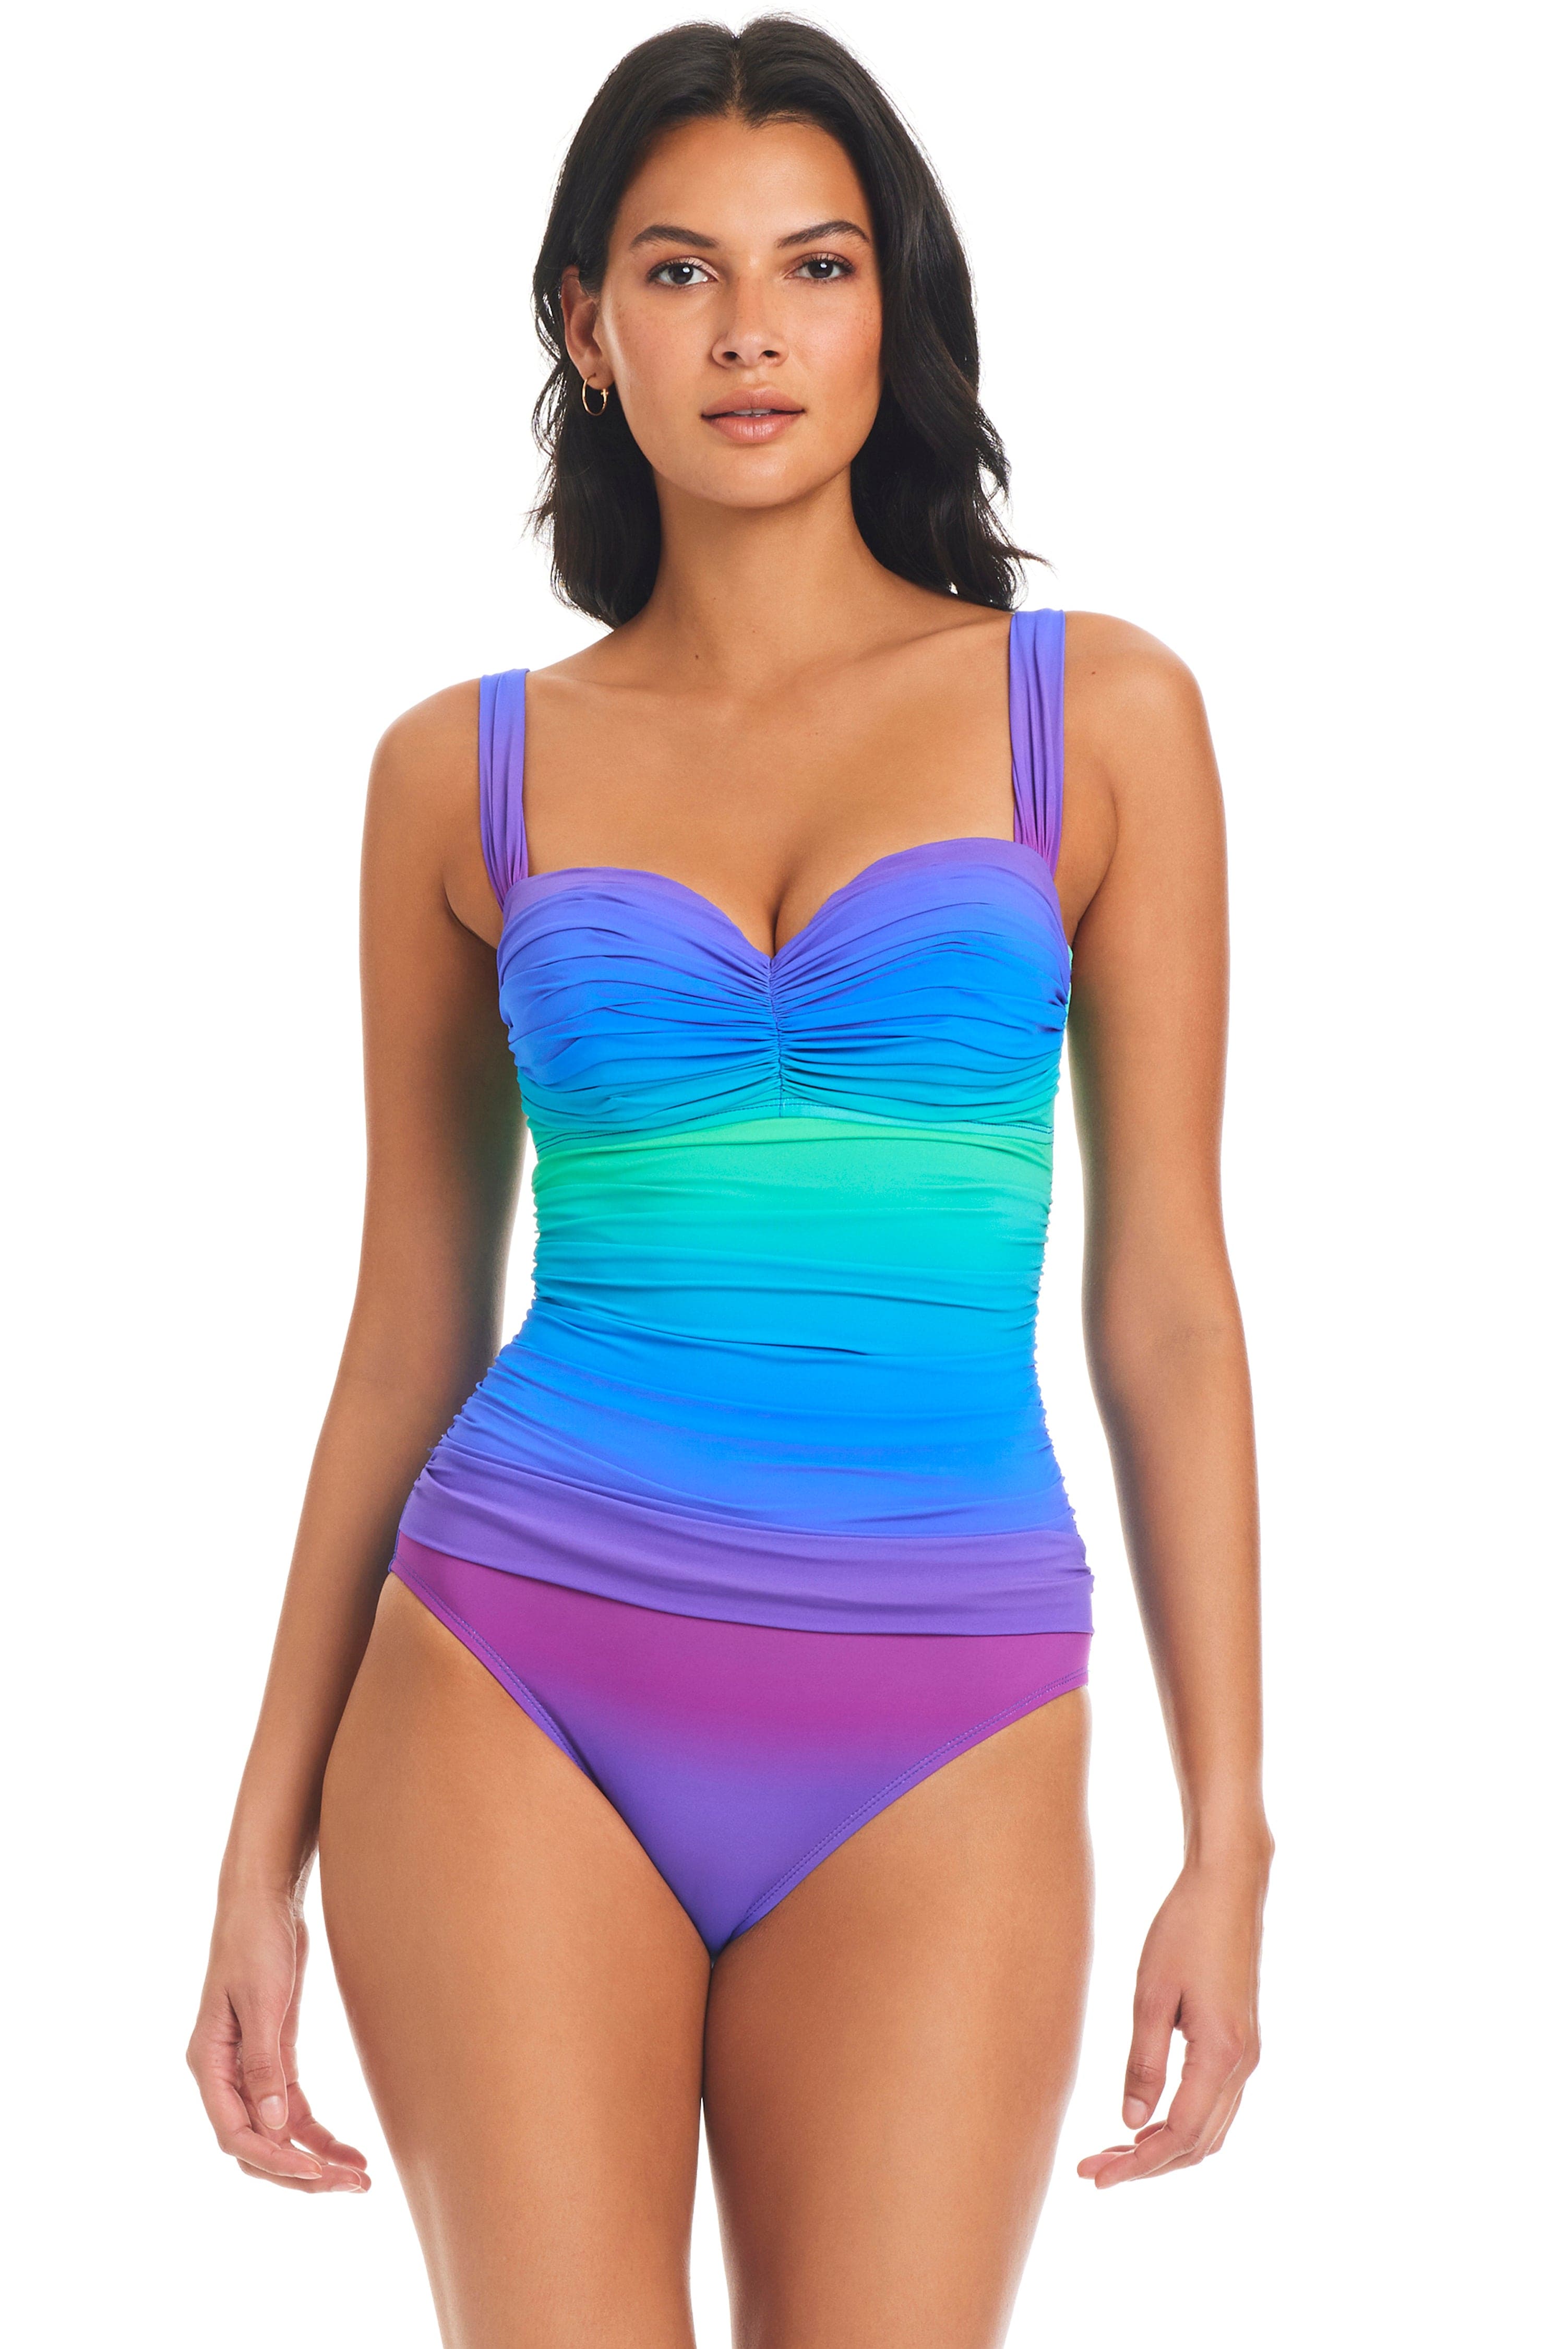 Women's Shirred Cup Underwire High Leg One Piece Swimsuit - Shade & Shore™  Blue Shine 34DD